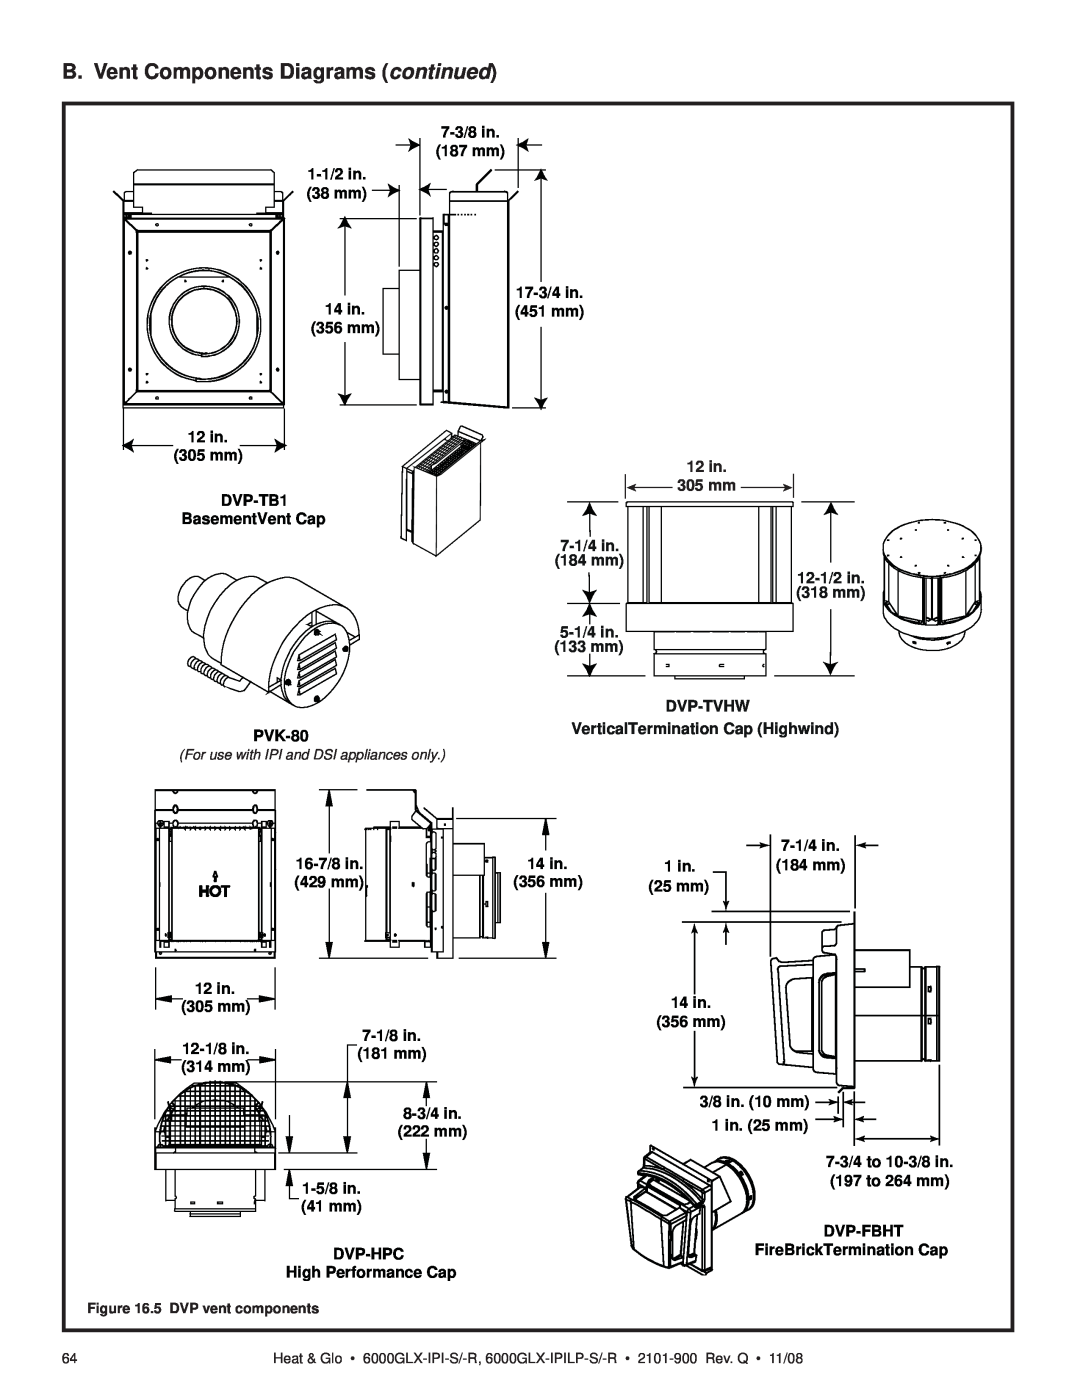 Heat & Glo LifeStyle 6000GLX-IPI-S/-R B. Vent Components Diagrams continued, 12 in, 7-1/4in, 12-1/2in, 318 mm, 5-1/4in 